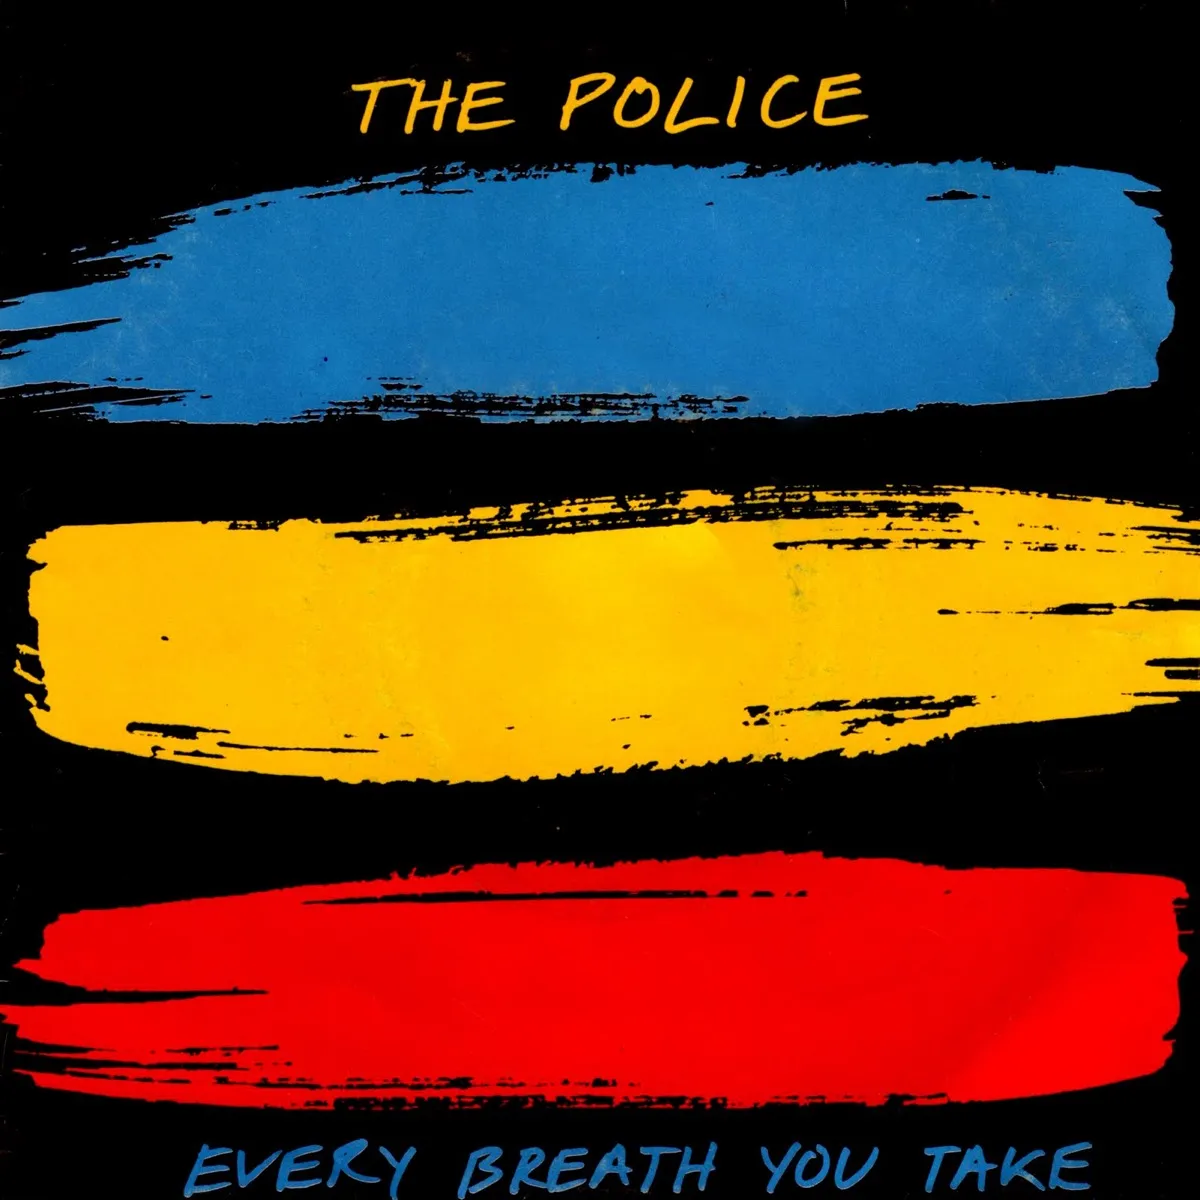 The Police "Every Breath You Take" single cover